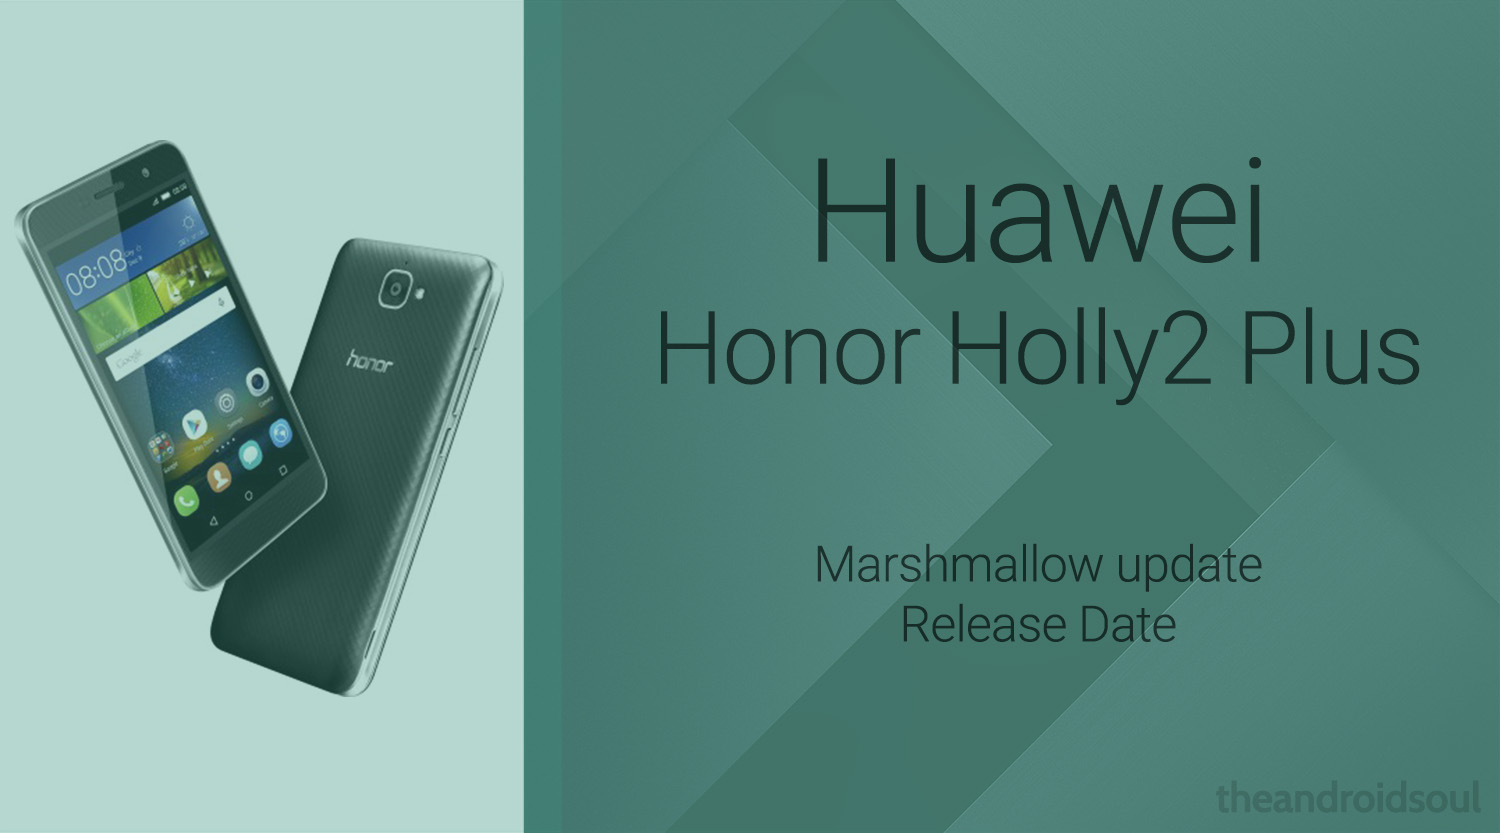 Honor Holly2 Plus Marshmallow Update To Release In February End